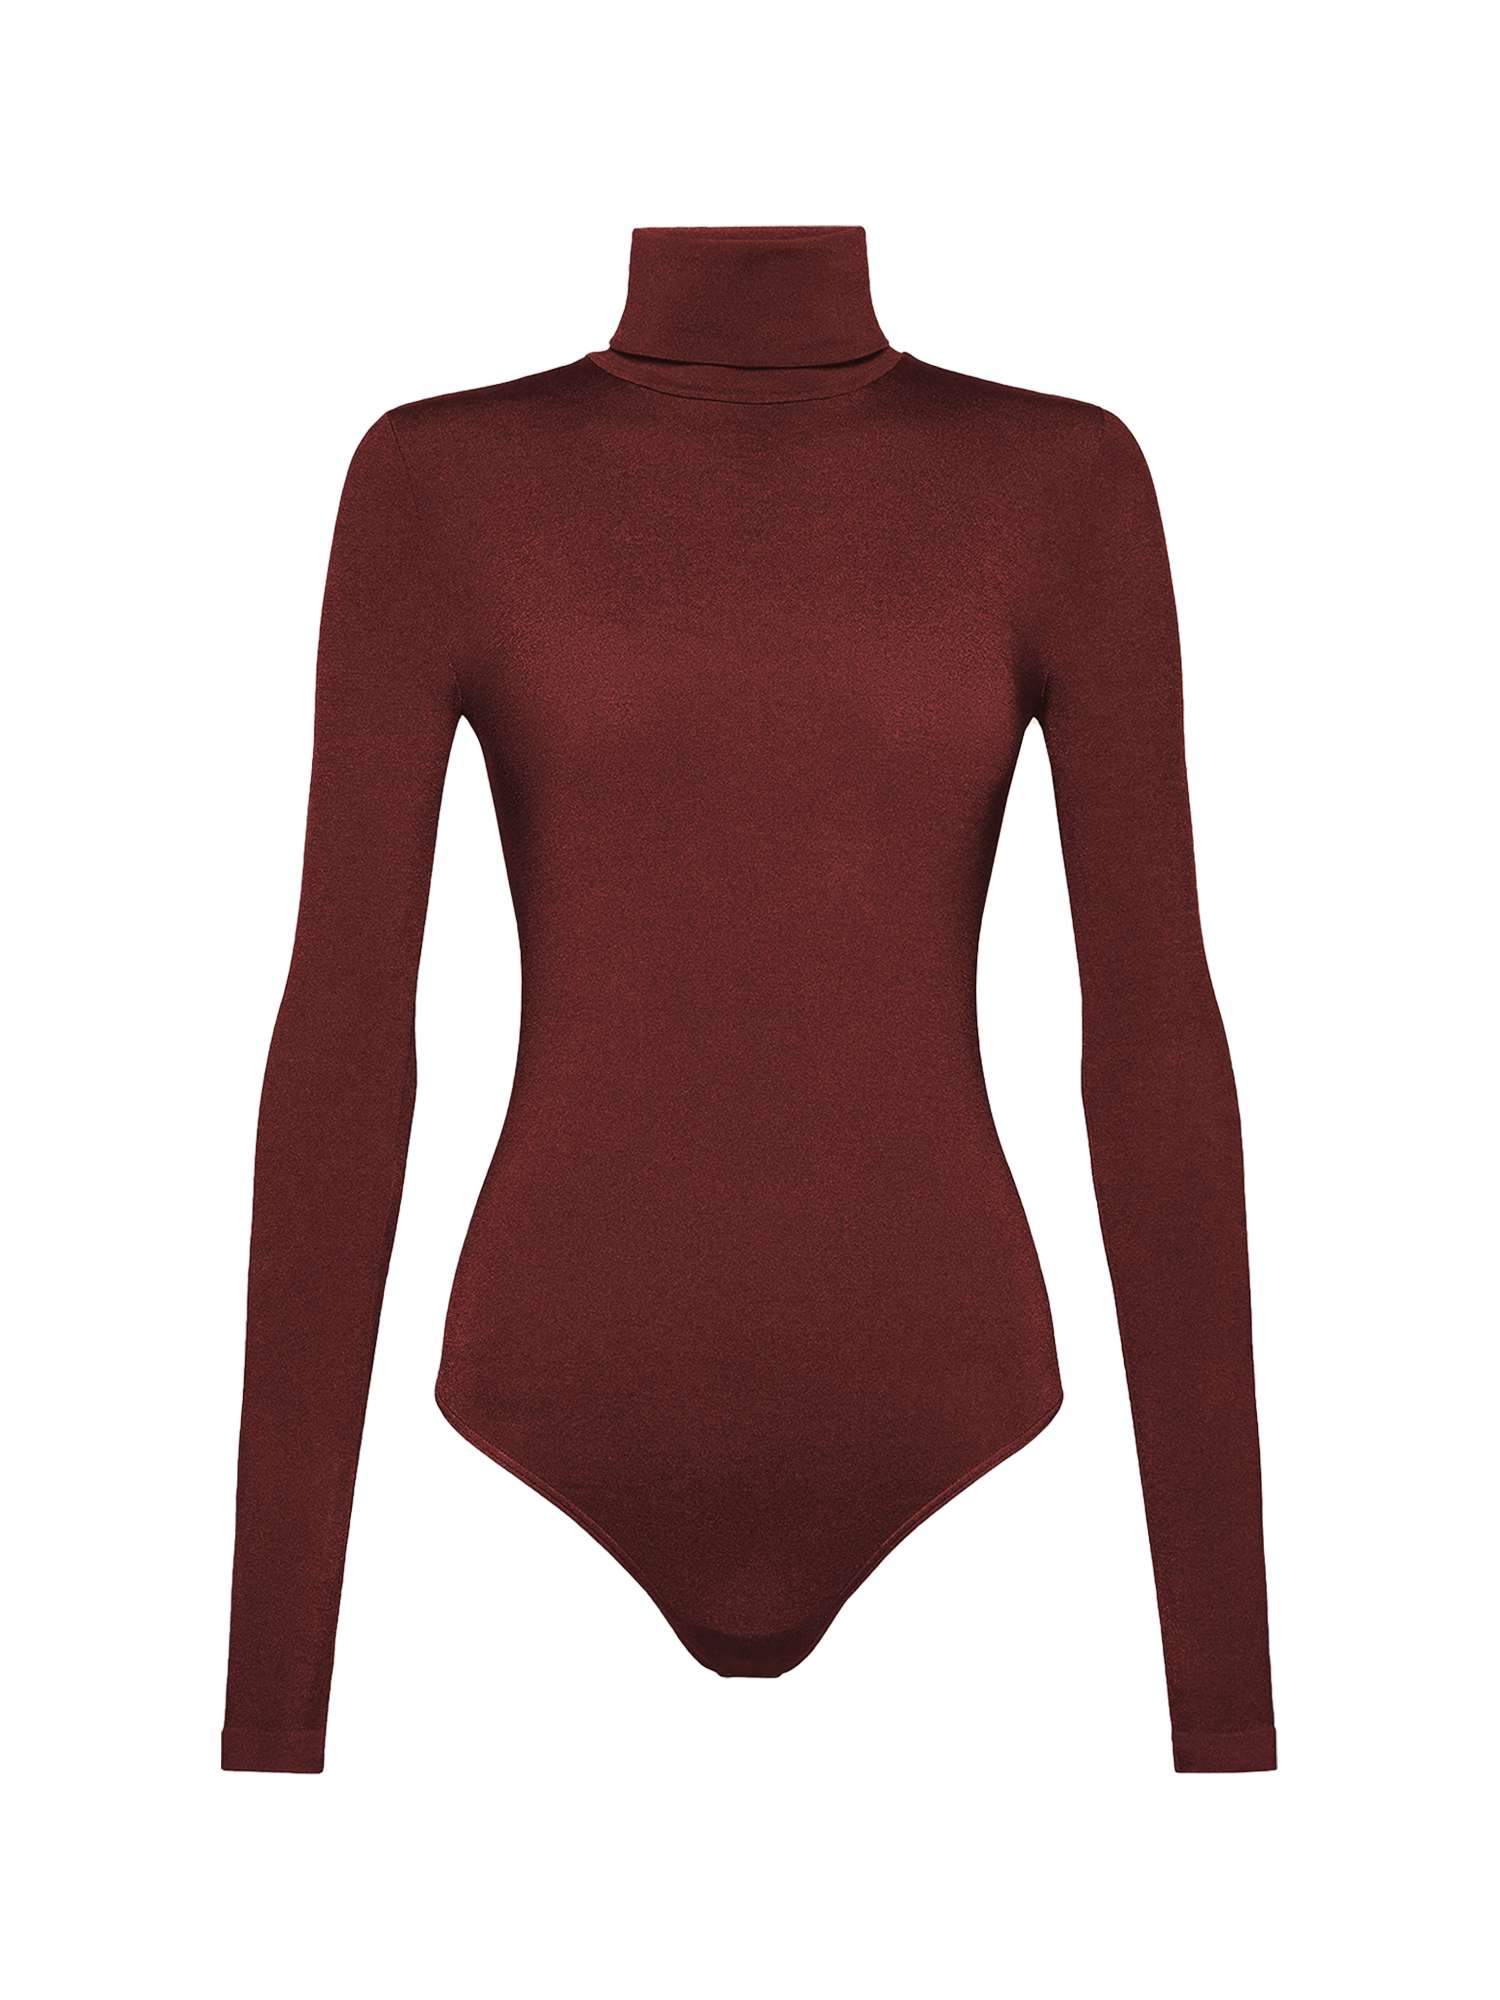 Wolford Colorado String Body for Women Long-Sleeve Bodysuit Seamless Fit  Versatile Style Perfect for Casual & Formal Wear at  Women's Clothing  store: Dress Shirts